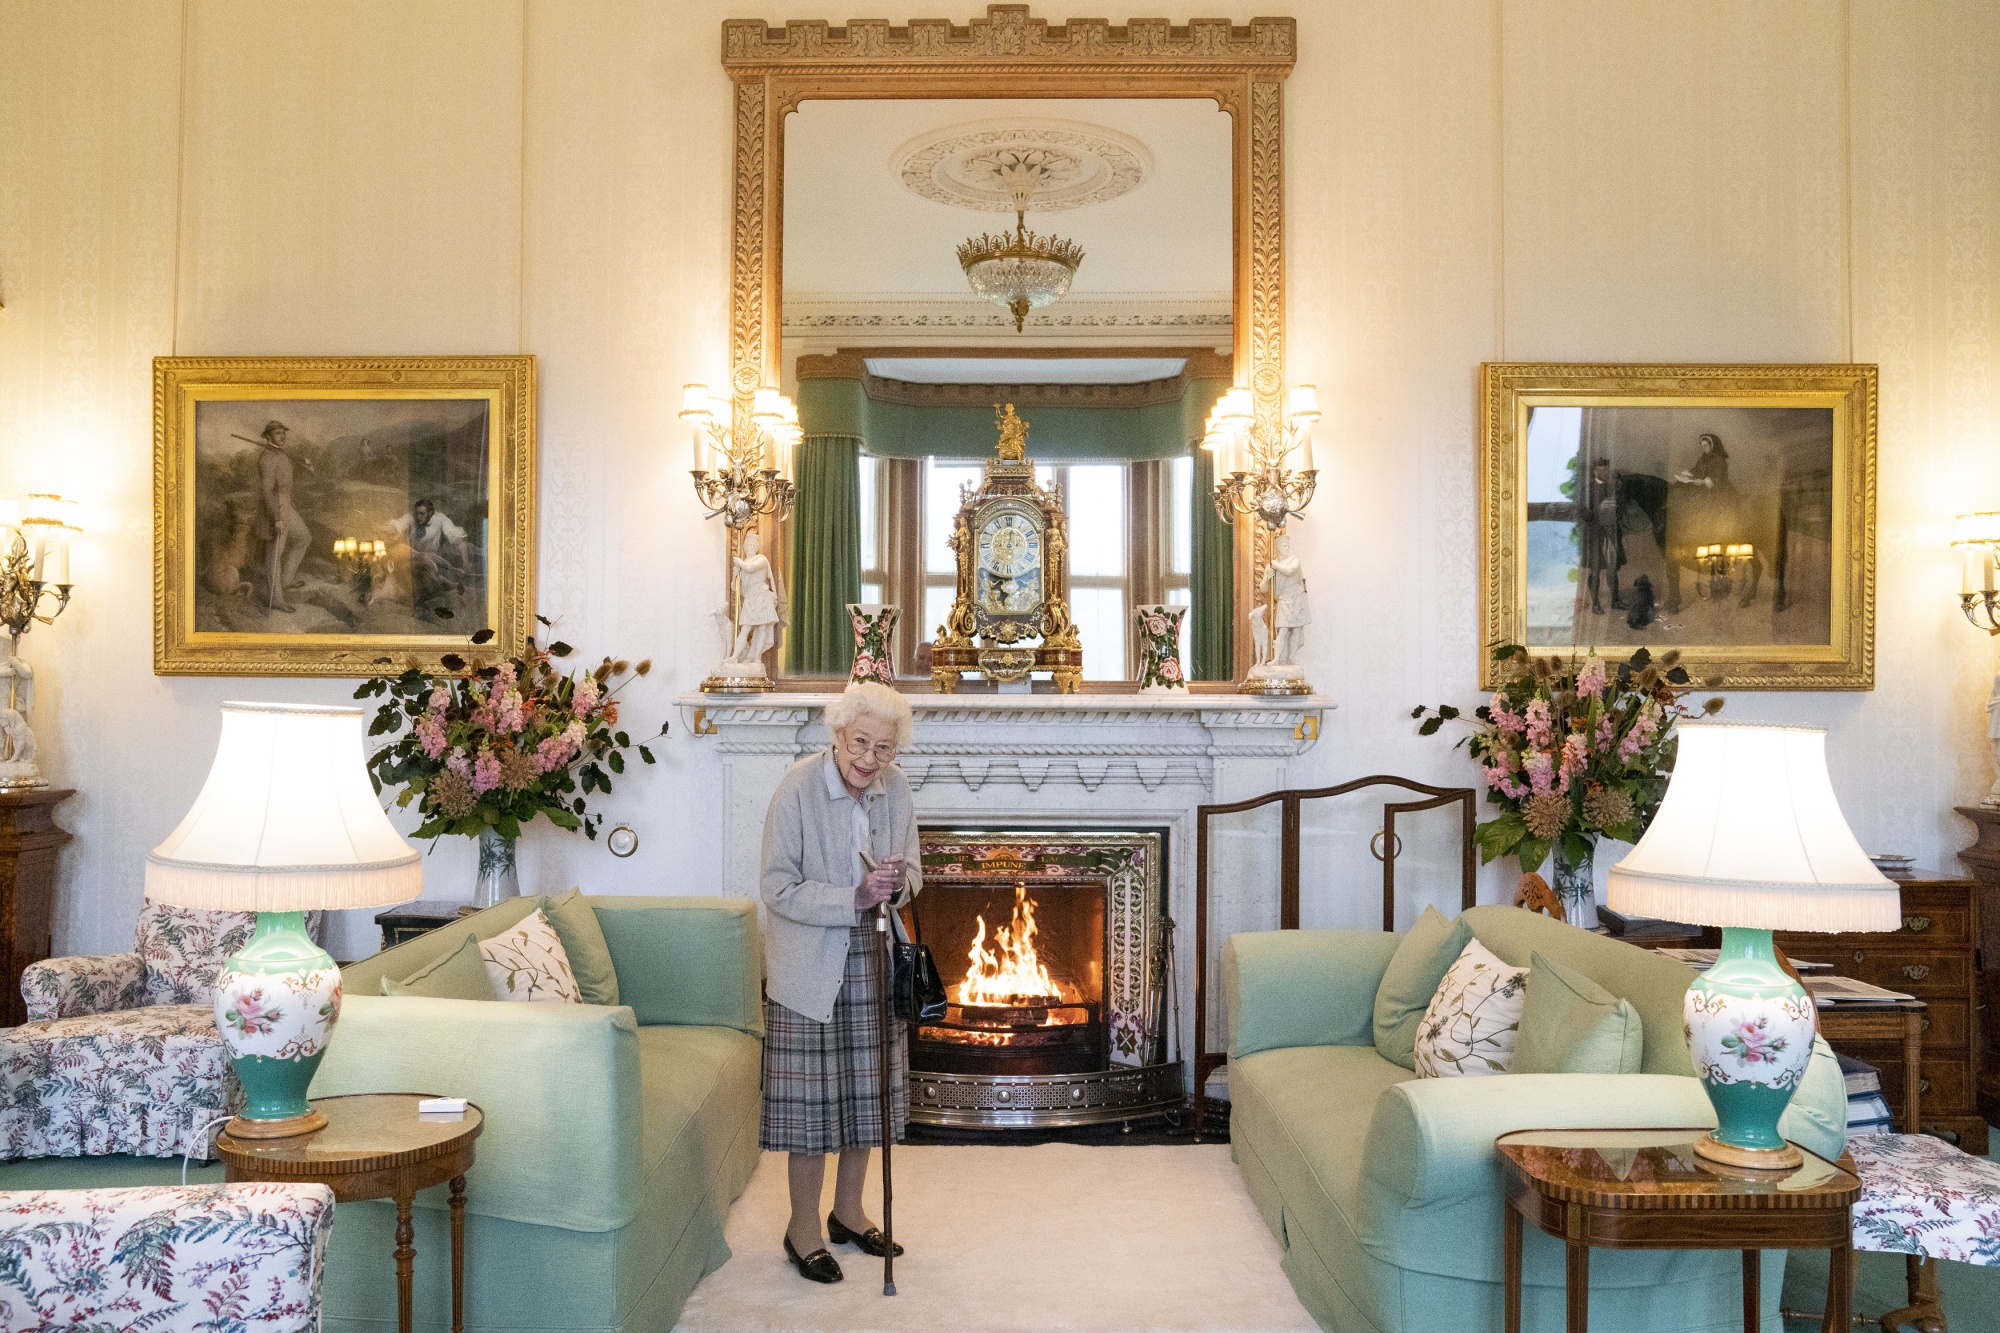 Queen Elizabeth II waits in the Drawing Room before receiving Liz Truss for an audience at Balmoral, Scotland, on Sept. 6.